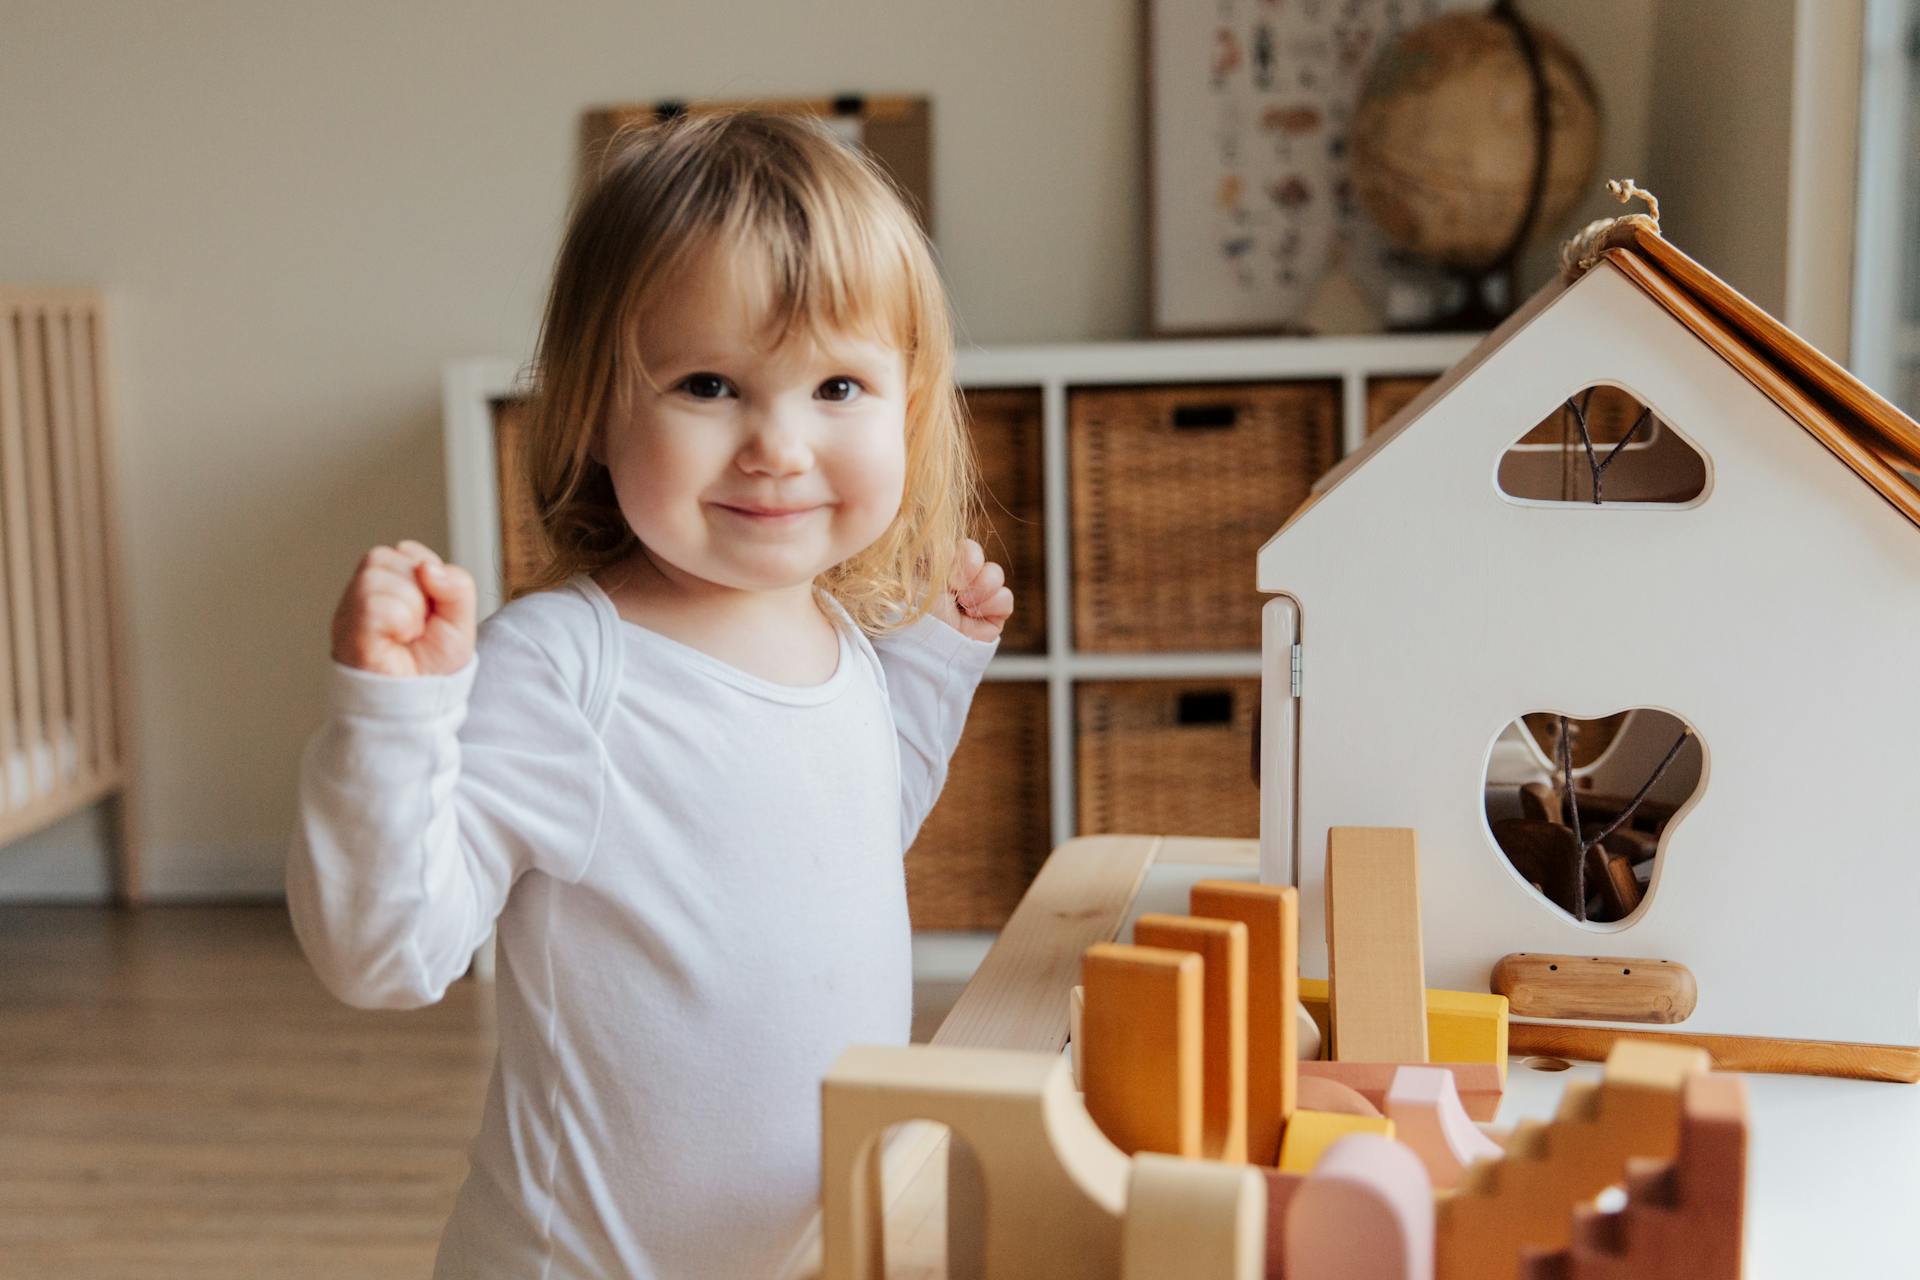 A little girl playing with her toys | Source: Pexels